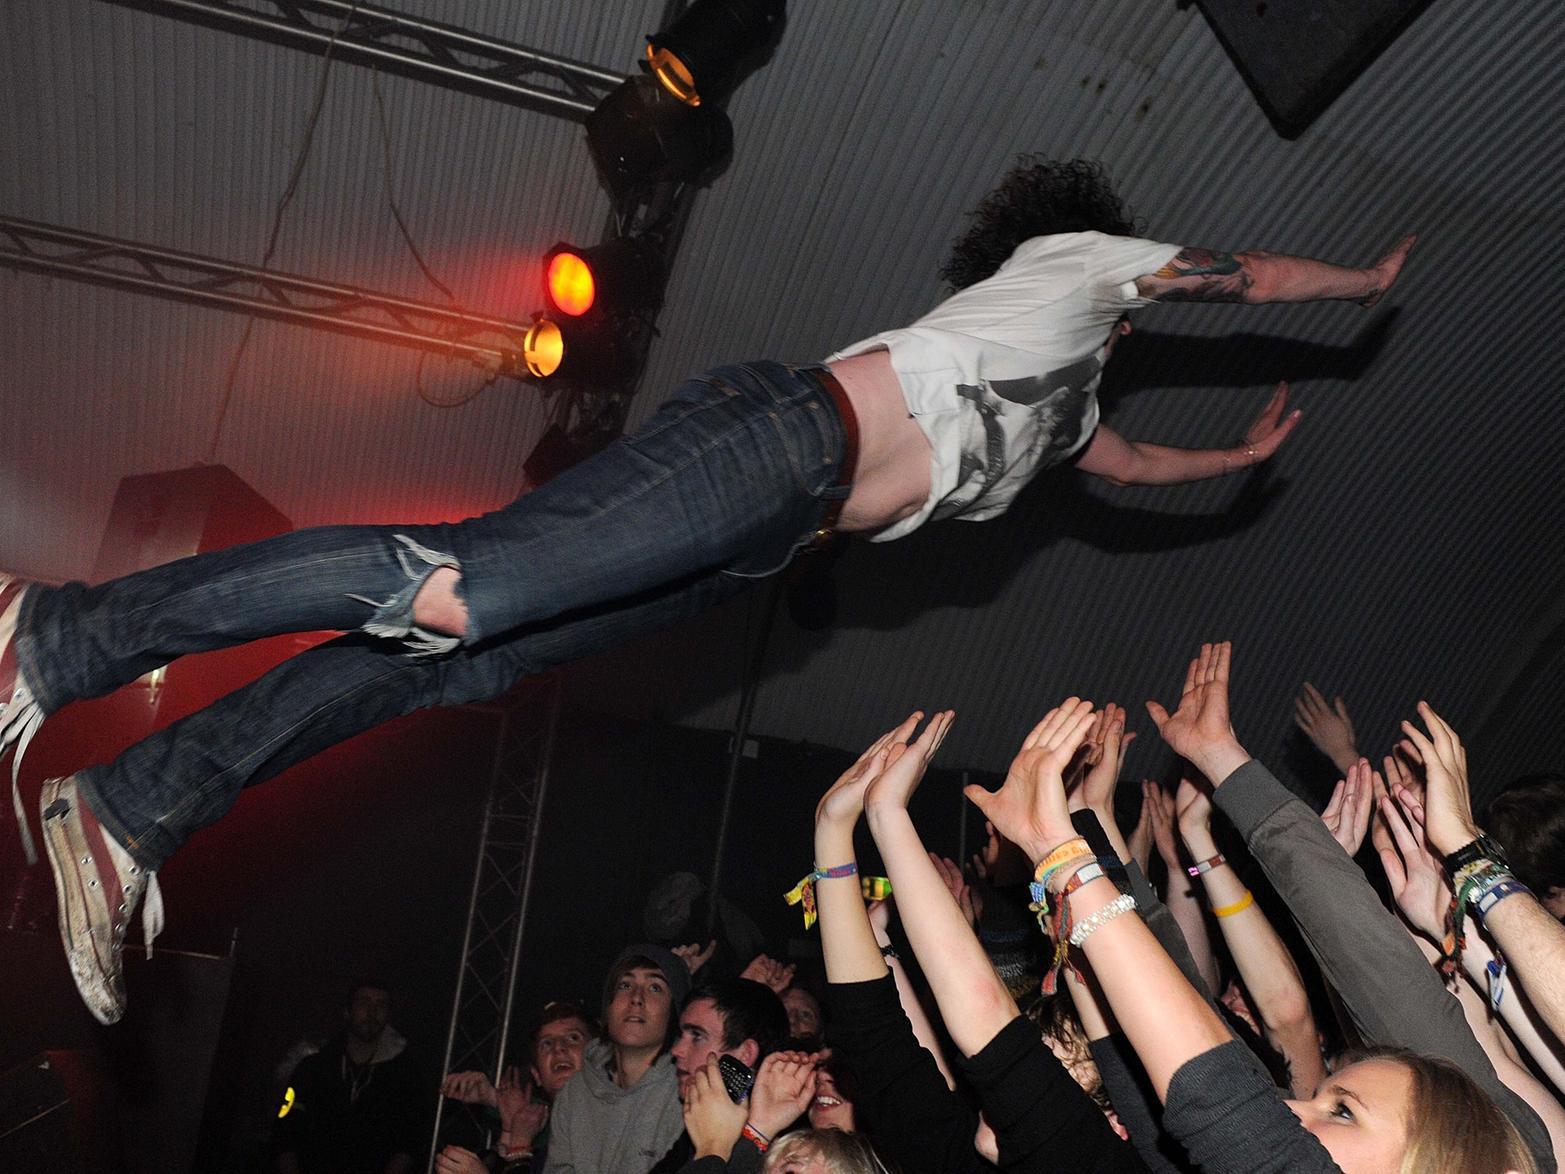 The Pigeon Detectives lead singer Matt Bowman takes a dive into the crowd. When: 6 December 2010